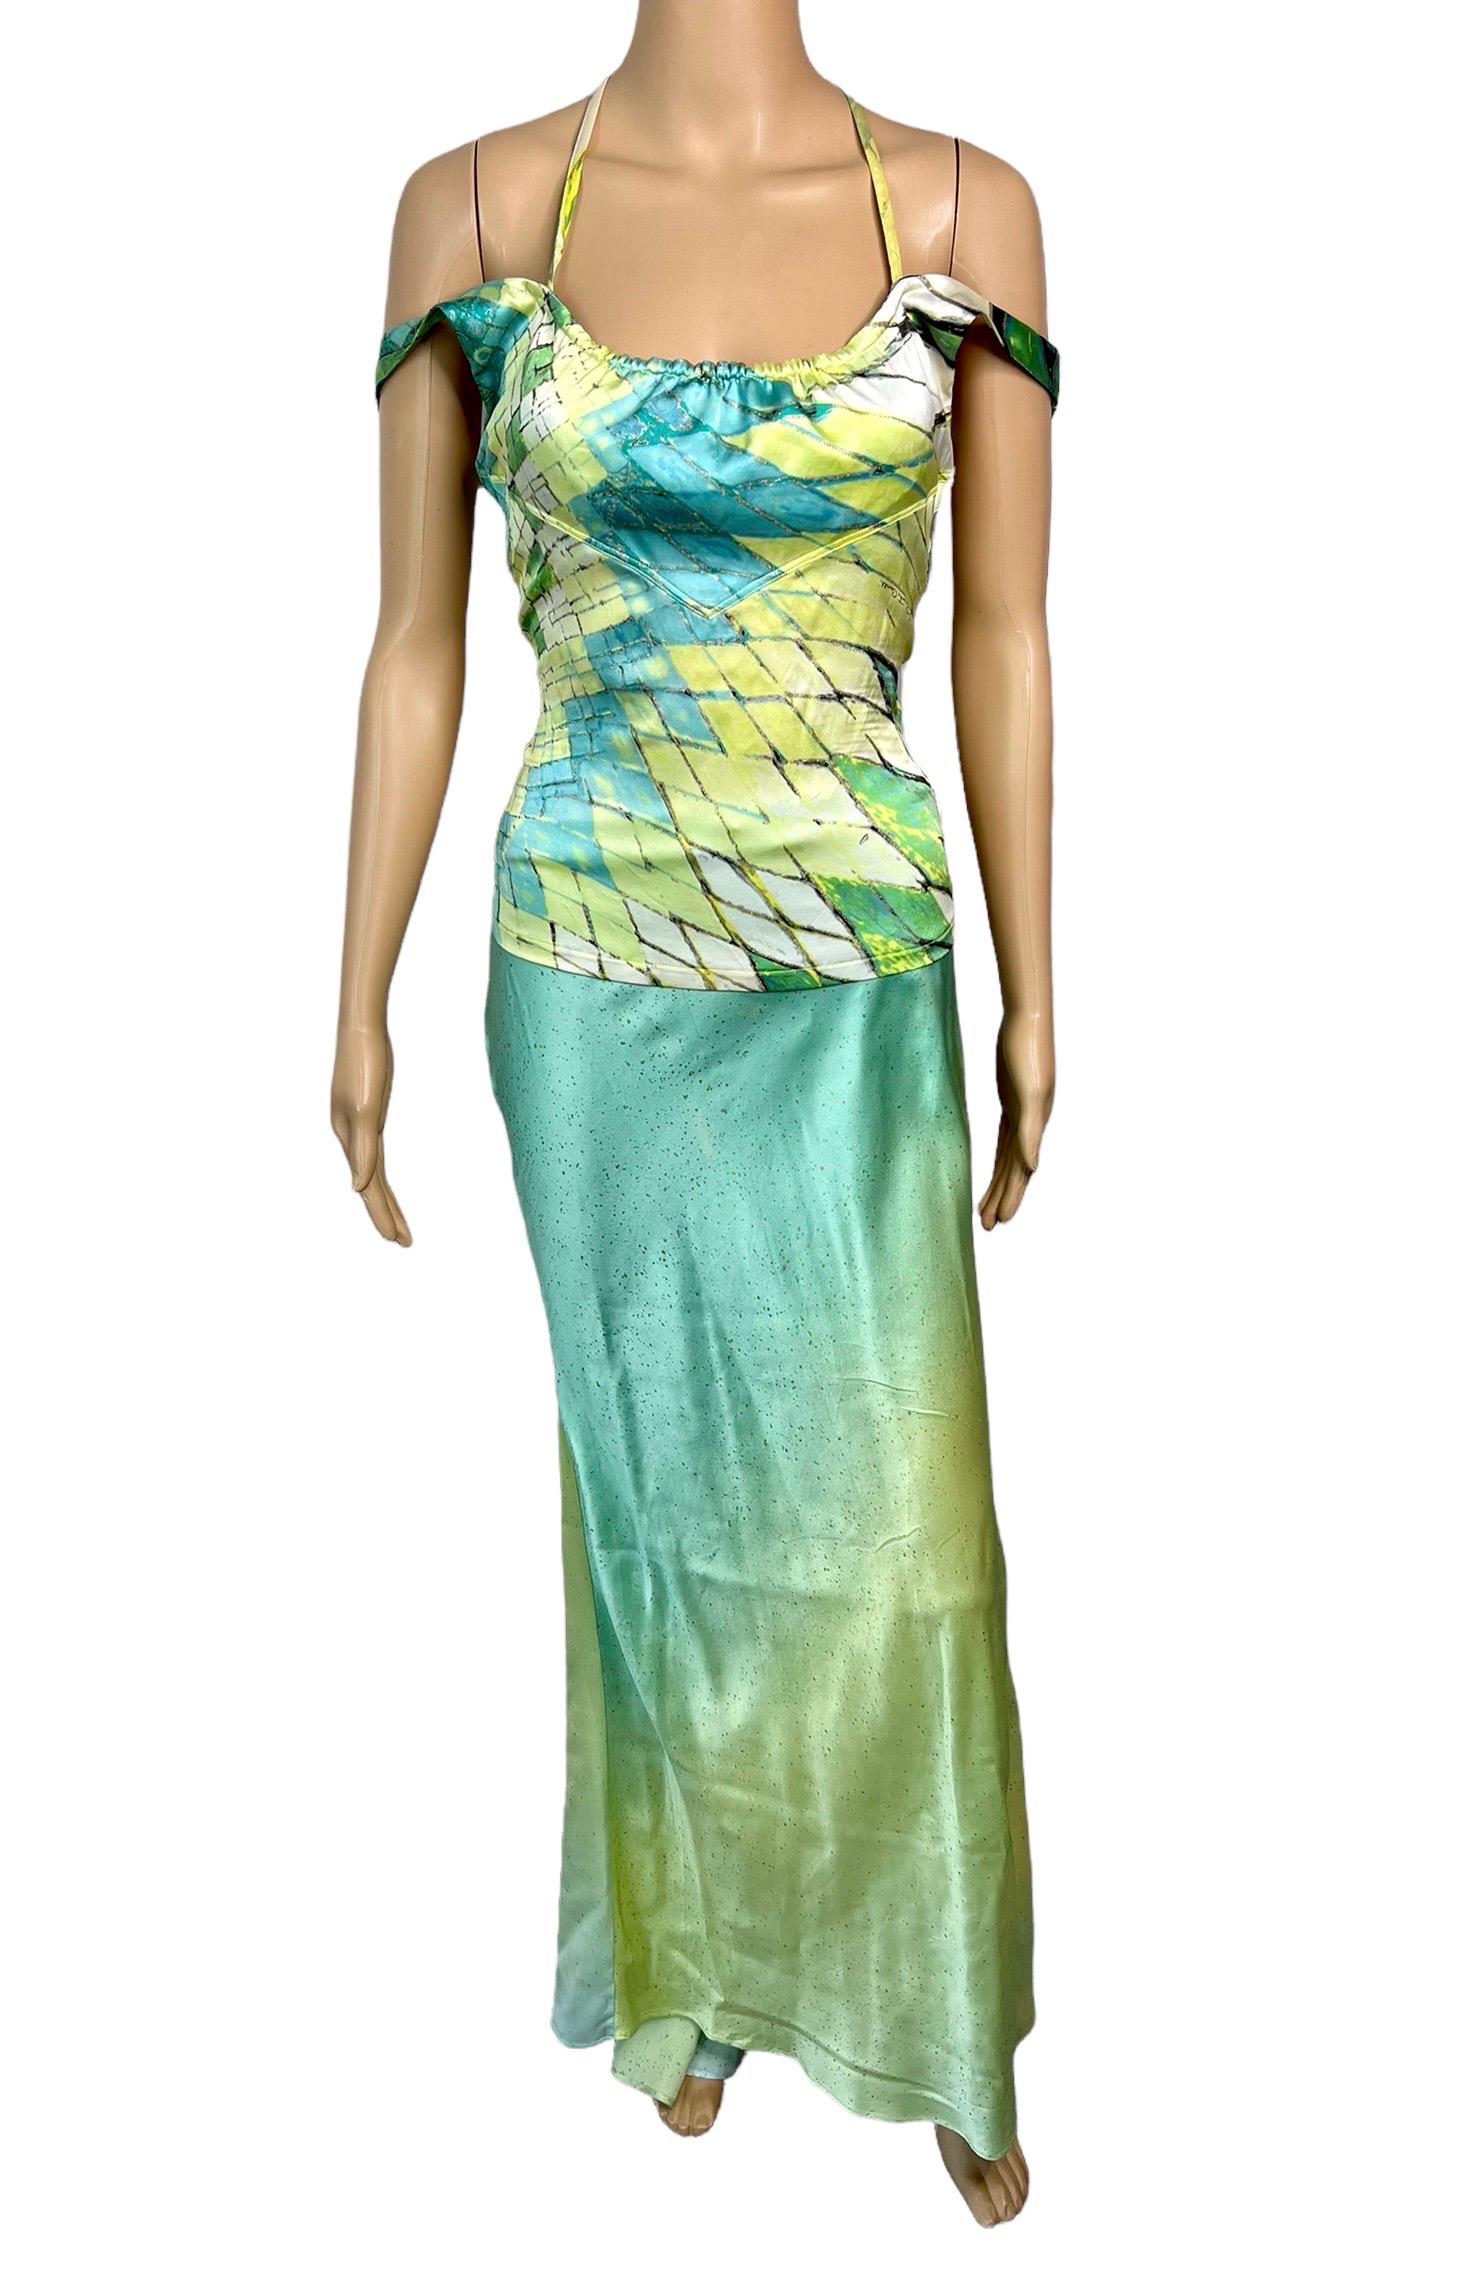 Roberto Cavalli S/S 2004 Feather Embellished Halter Top & Maxi Skirt 2 Piece Set For Sale 4